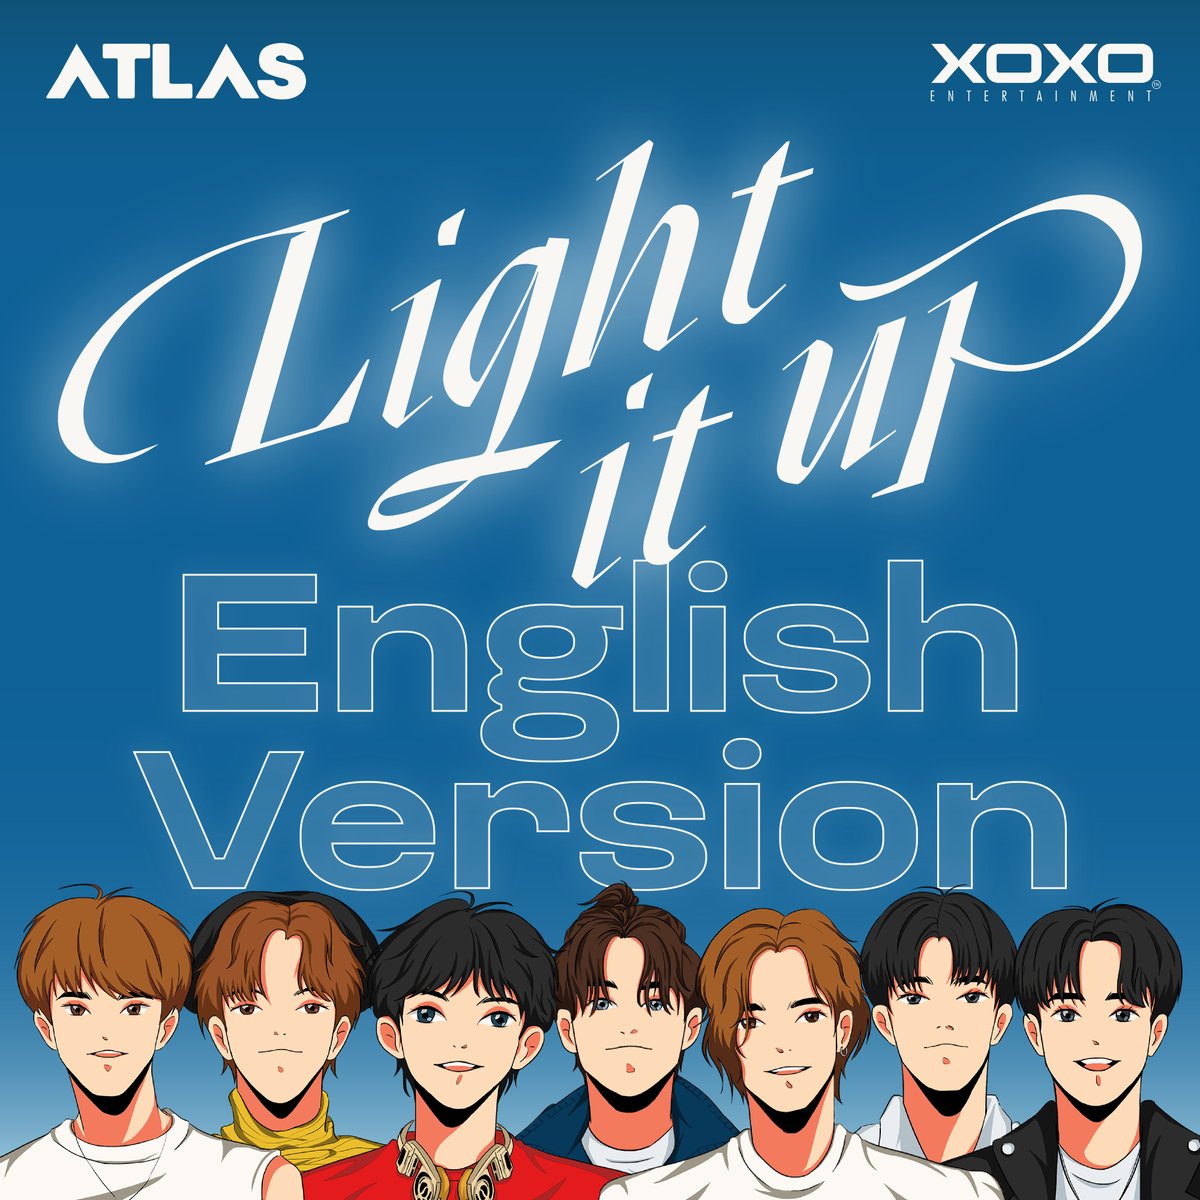 ATLAS - Light it up (English Version) Visualizer Video has been released on YouTube : ATLAS ⭐️youtu.be/XgMlh0fYHDU 🎧 Available now on all streaming platforms #AtlasLightitup #Lightitup #ATLAS_th #ATLASth #XOXOentertainment #TPOP